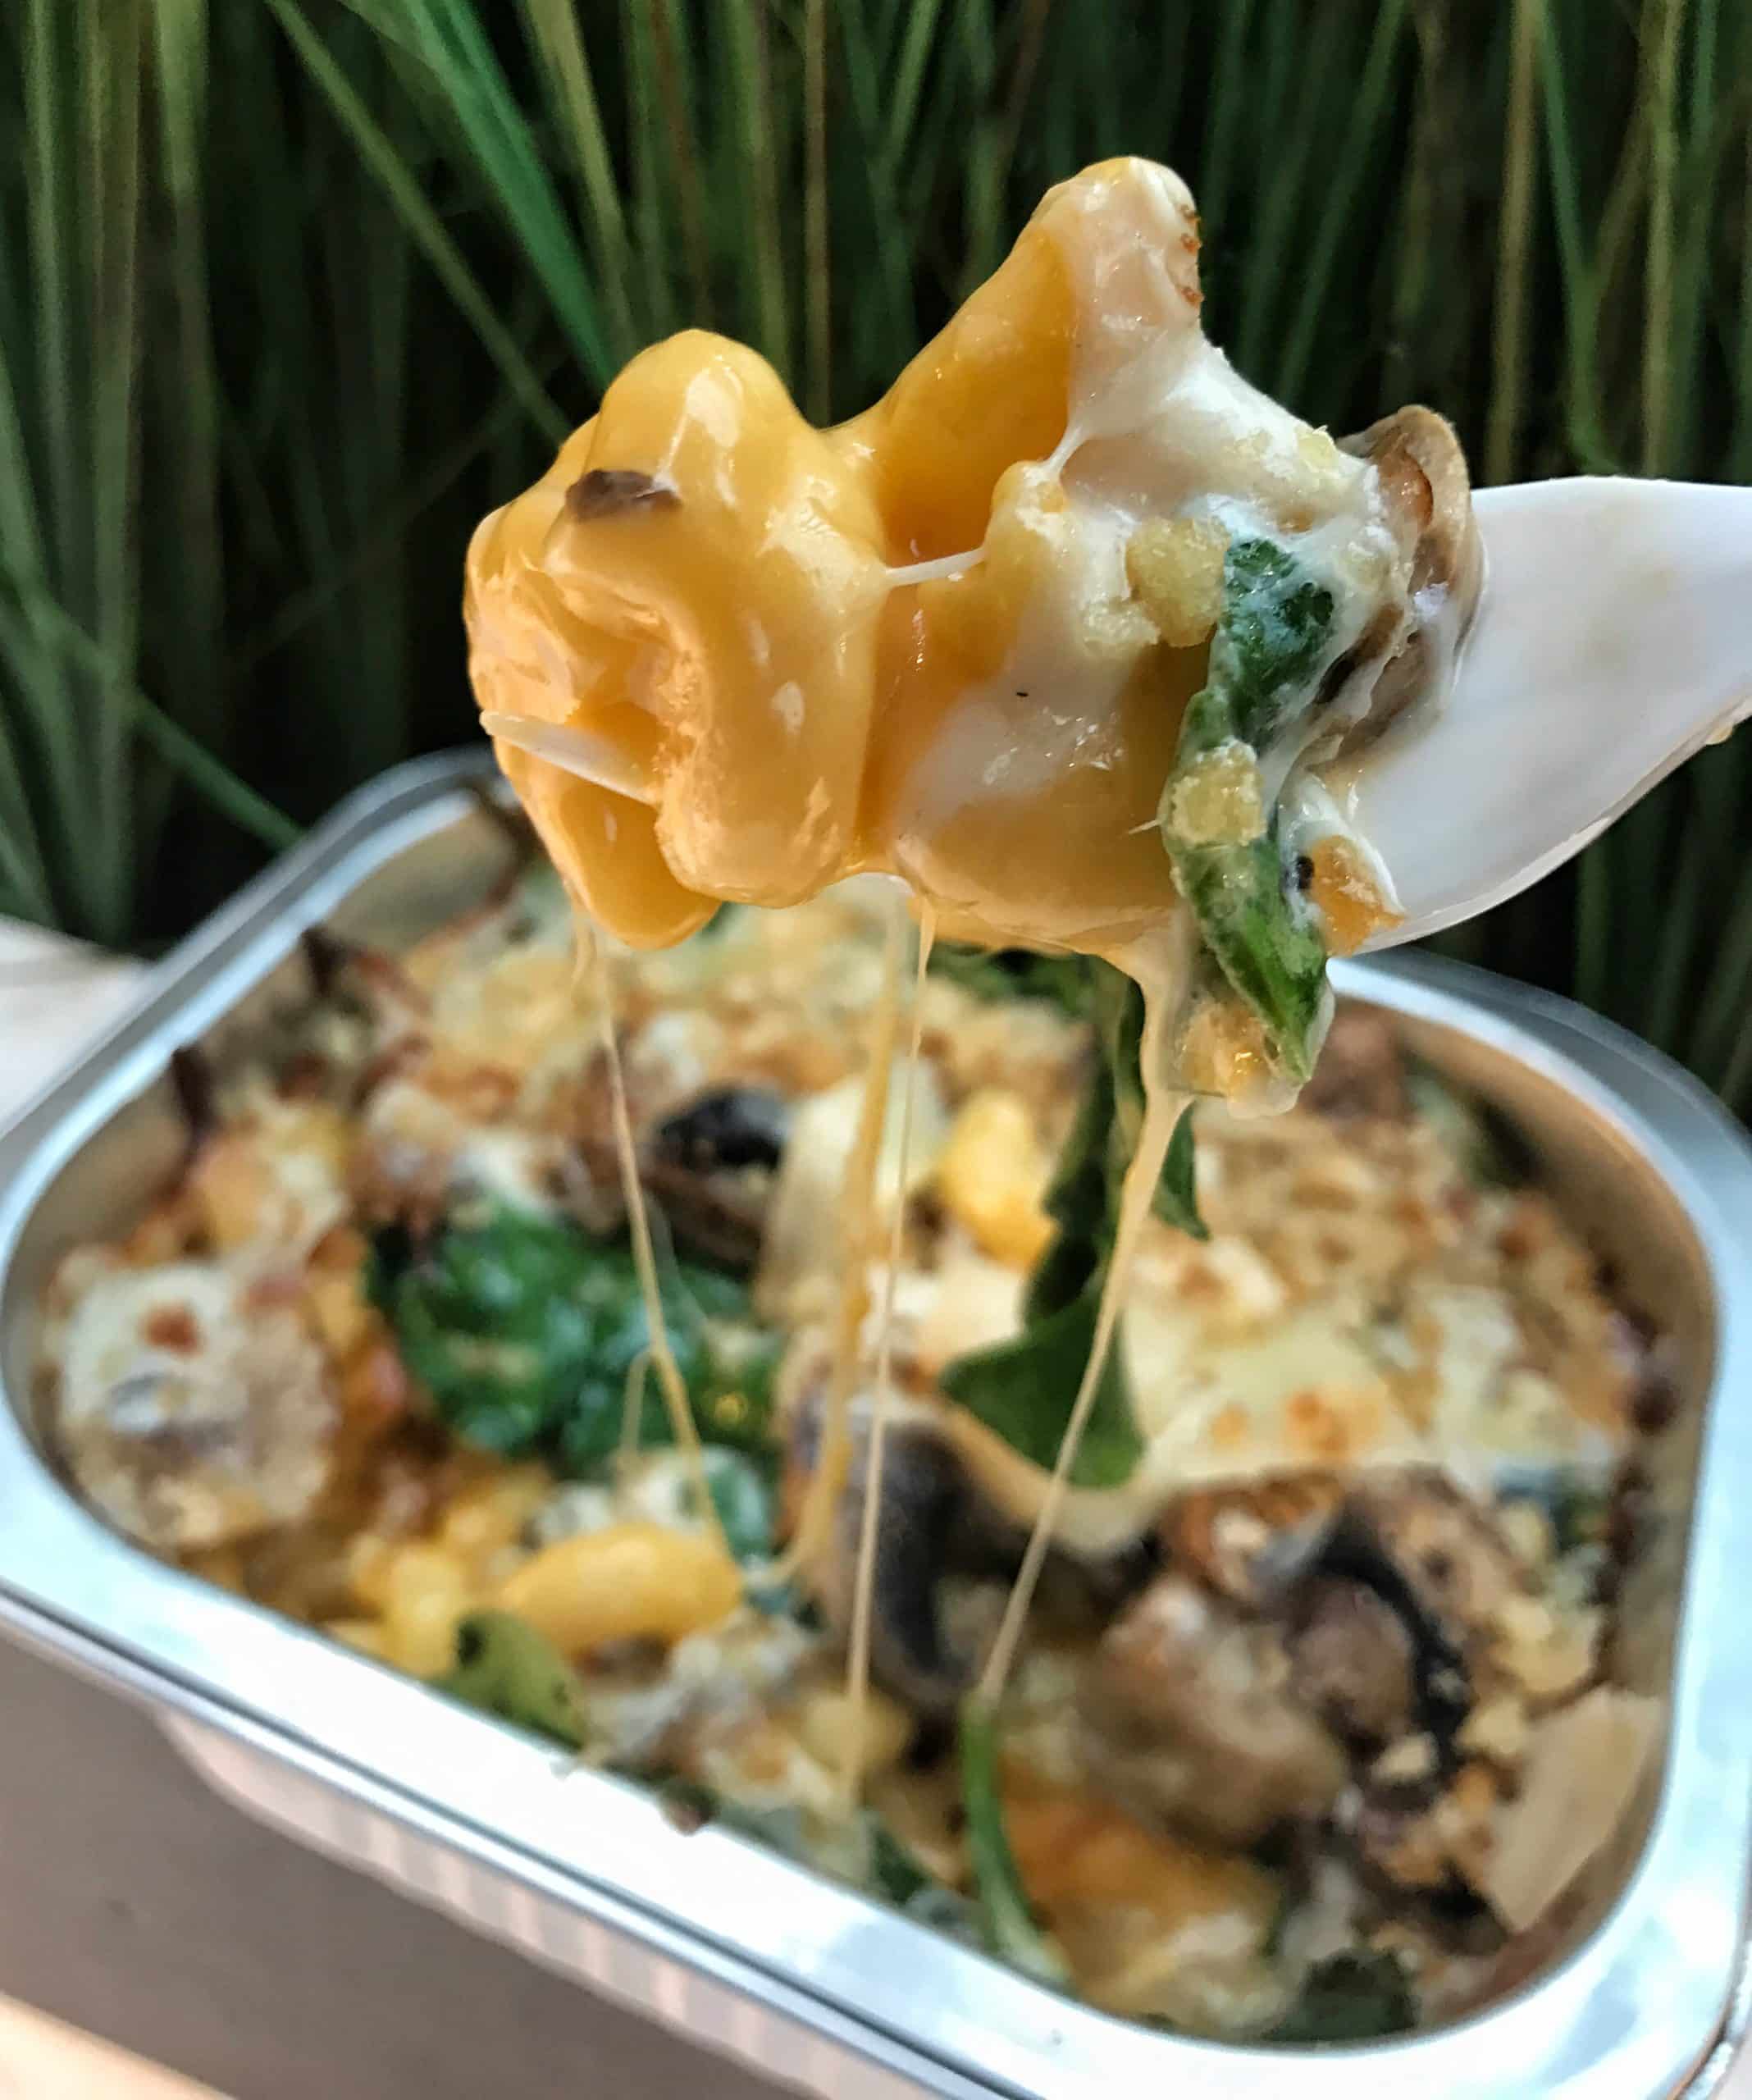 Mac and cheese food truck nyc catering